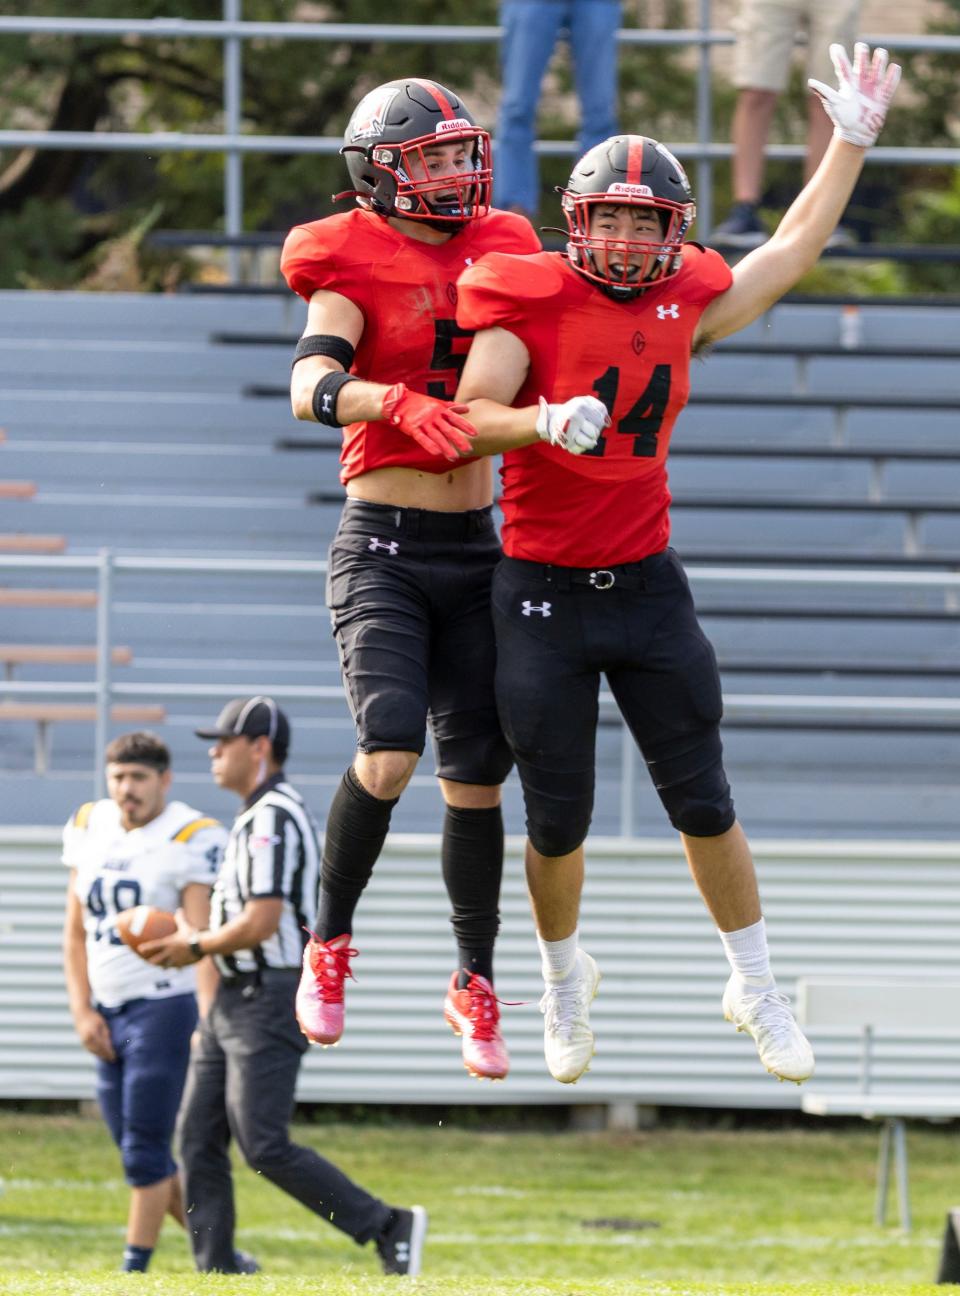 Grinnell College’s Davis Cooper (5) and Jio Hong (14) shown in a game against Beloit in Grinnell Oct.1, 2022. Cooper, 18, of Pasadena, California, was struck and killed late Monday, Oct. 31, 2022, while walking on Interstate Highway 80 near Altoona.